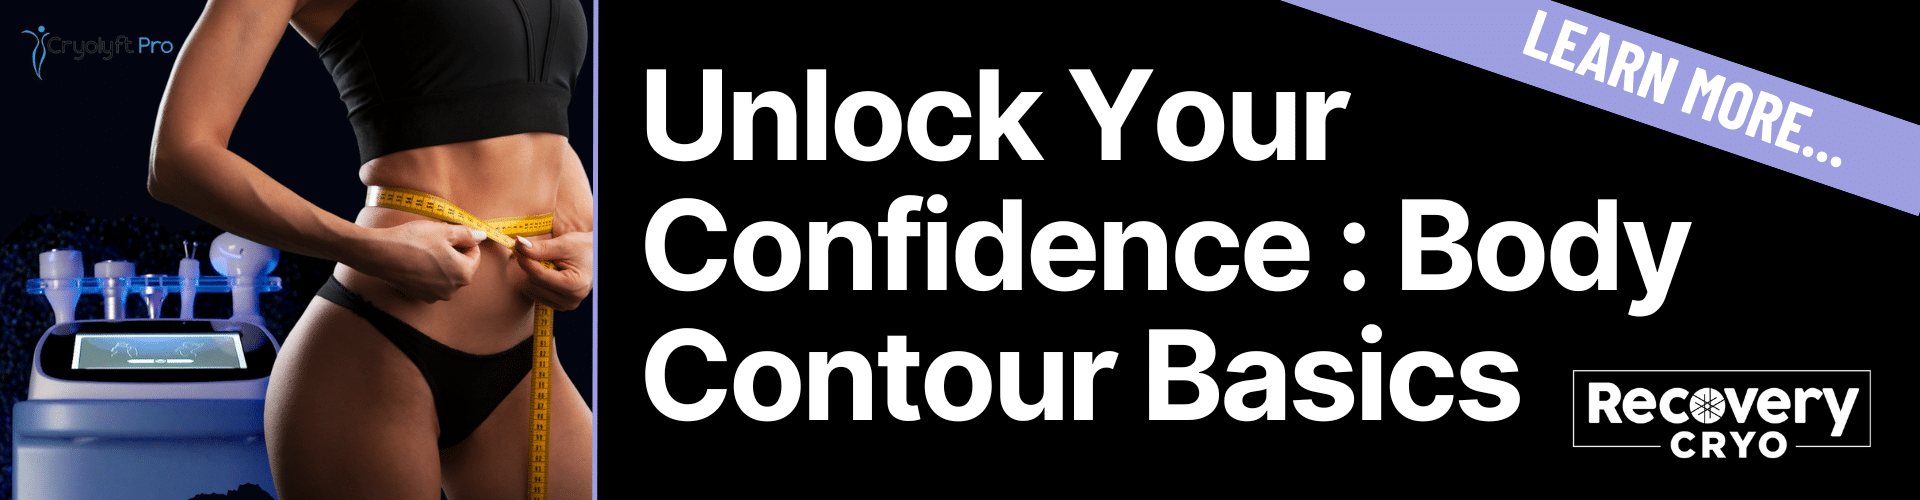 Unlock Your Confidence! Learn more about body contouring and how it can benefit you!